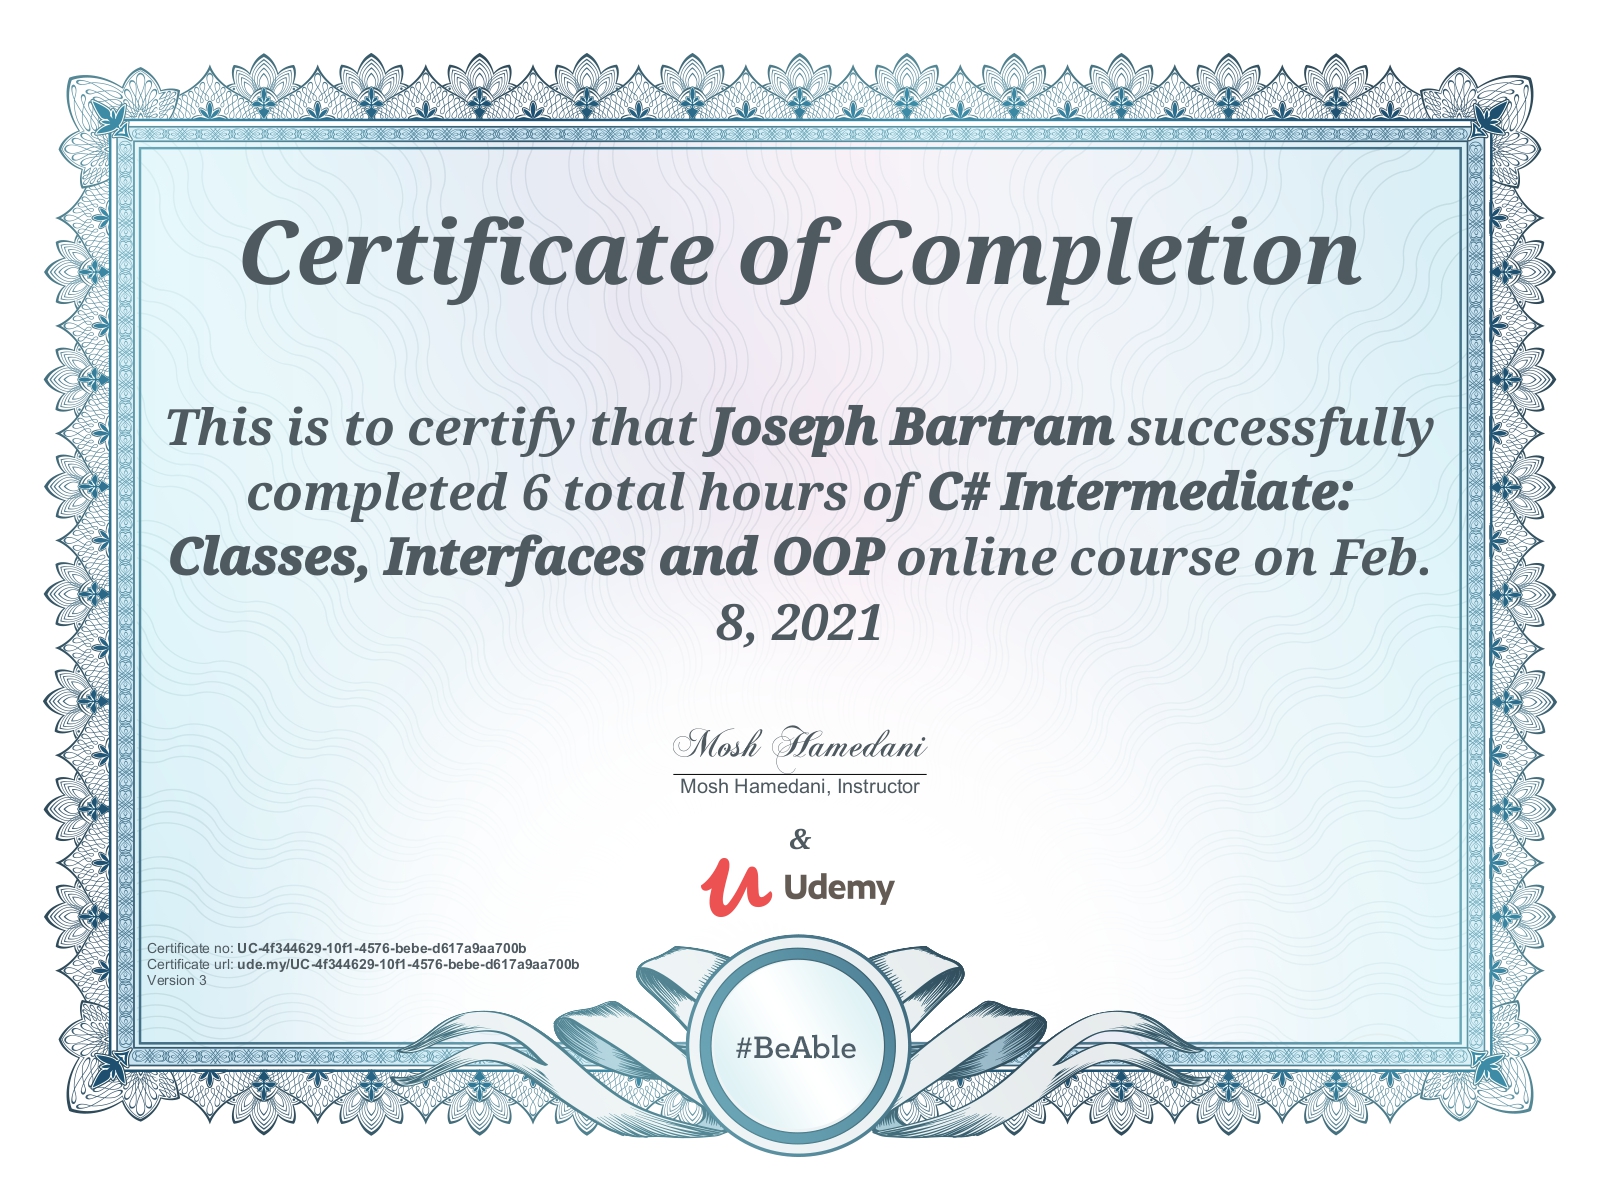 image of udemy certificate